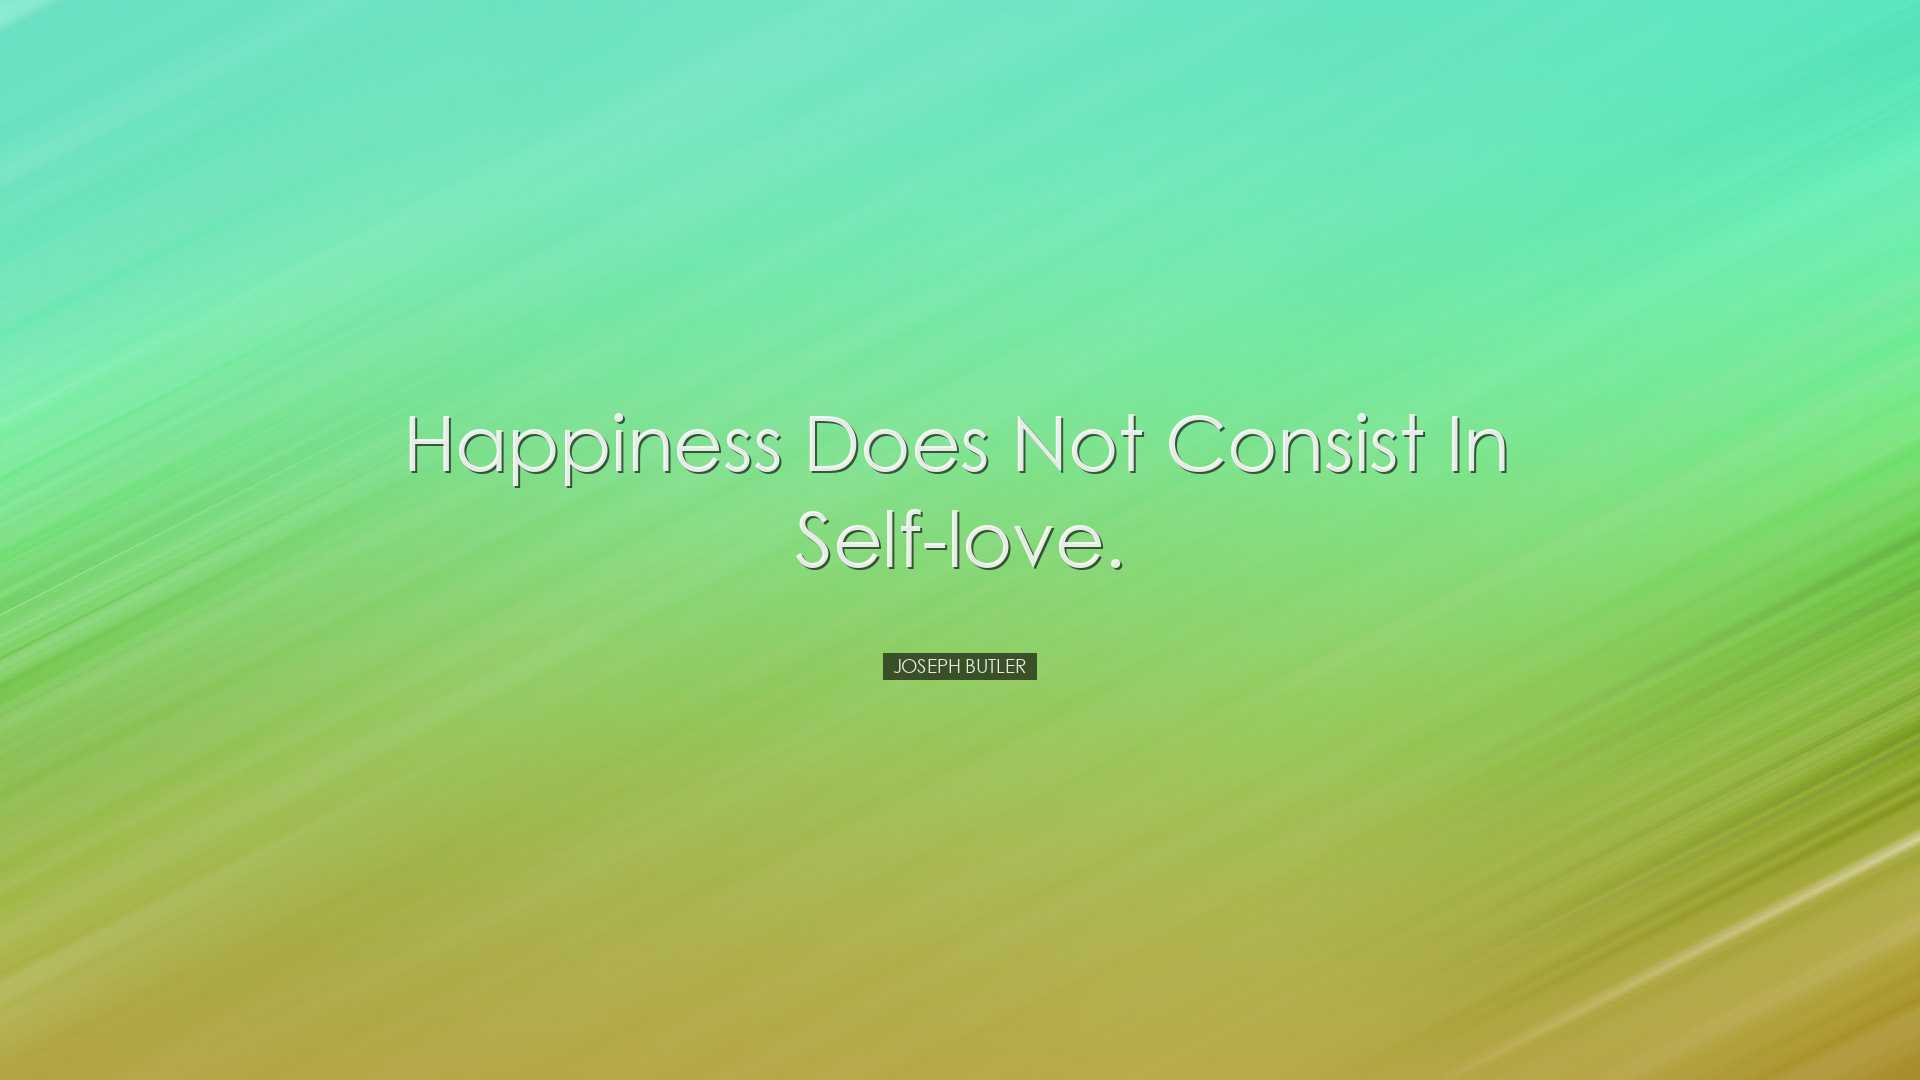 Happiness does not consist in self-love. - Joseph Butler